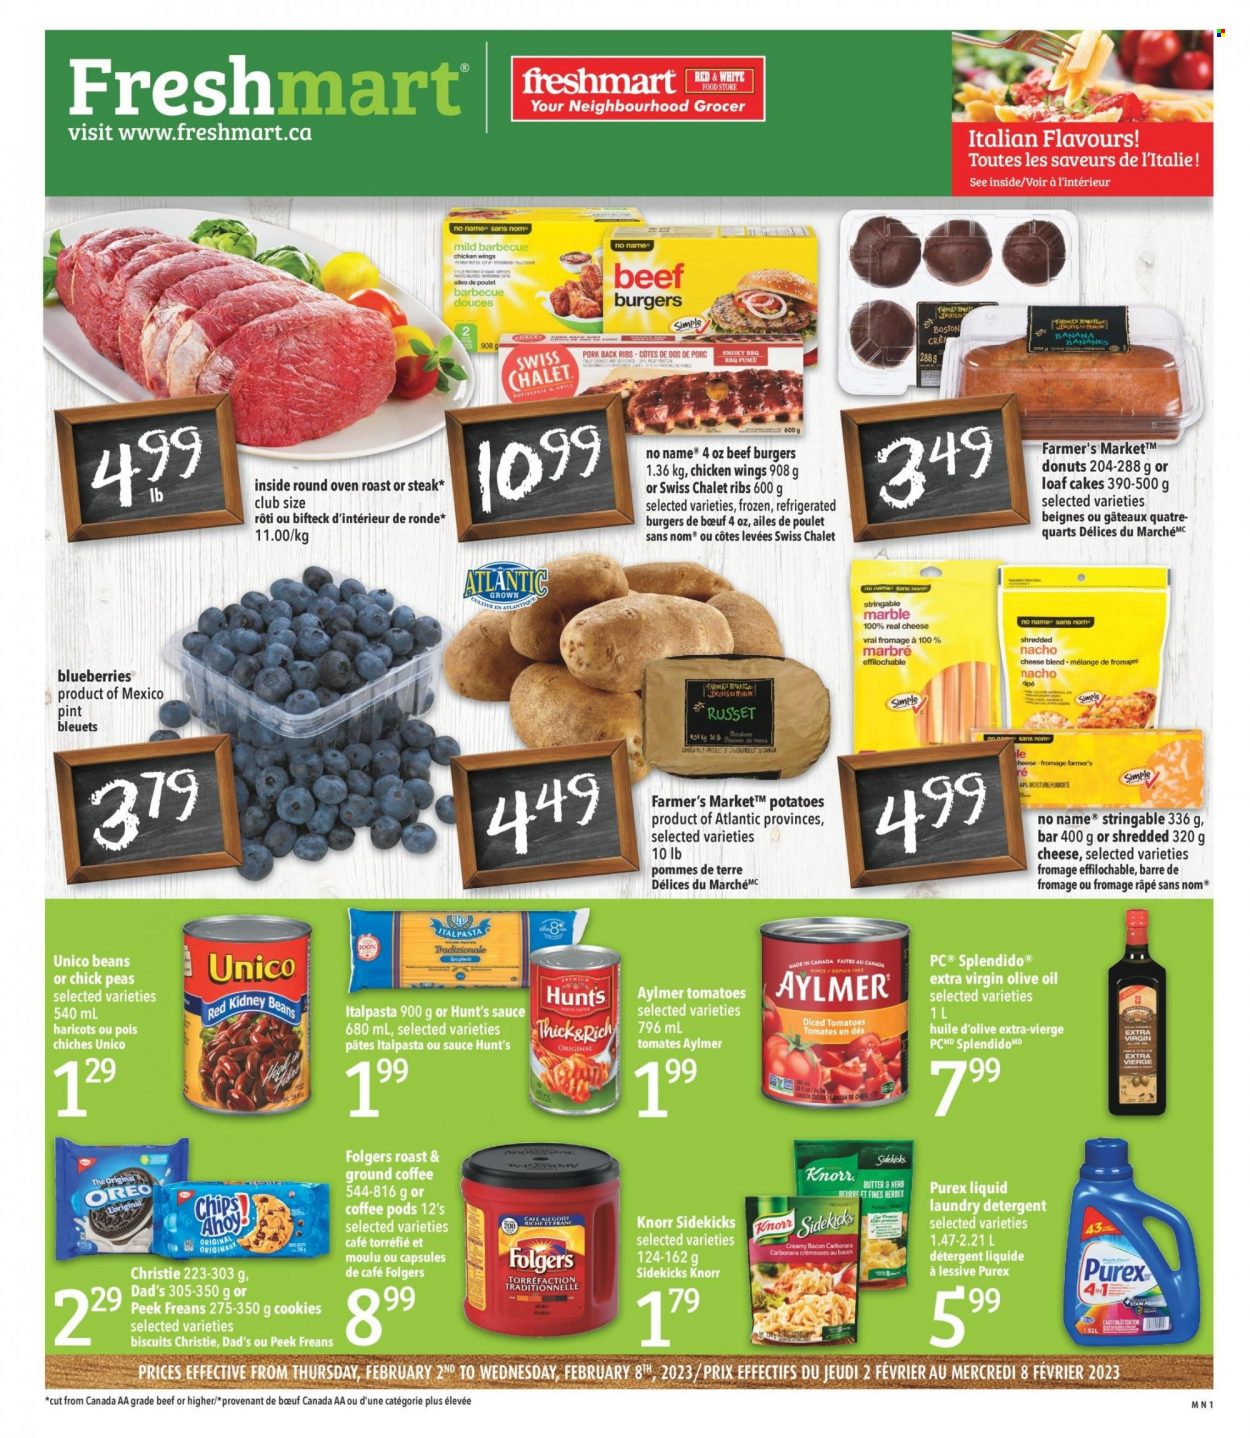 thumbnail - Freshmart Flyer - February 02, 2023 - February 08, 2023 - Sales products - cake, donut, russet potatoes, potatoes, peas, blueberries, No Name, hamburger, sauce, beef burger, chicken wings, cookies, biscuit, kidney beans, diced tomatoes, extra virgin olive oil, olive oil, oil, coffee, coffee pods, Folgers, ground coffee, ribs, pork meat, pork ribs, pork back ribs, laundry detergent, Purex, detergent, Oreo, steak, Knorr. Page 1.